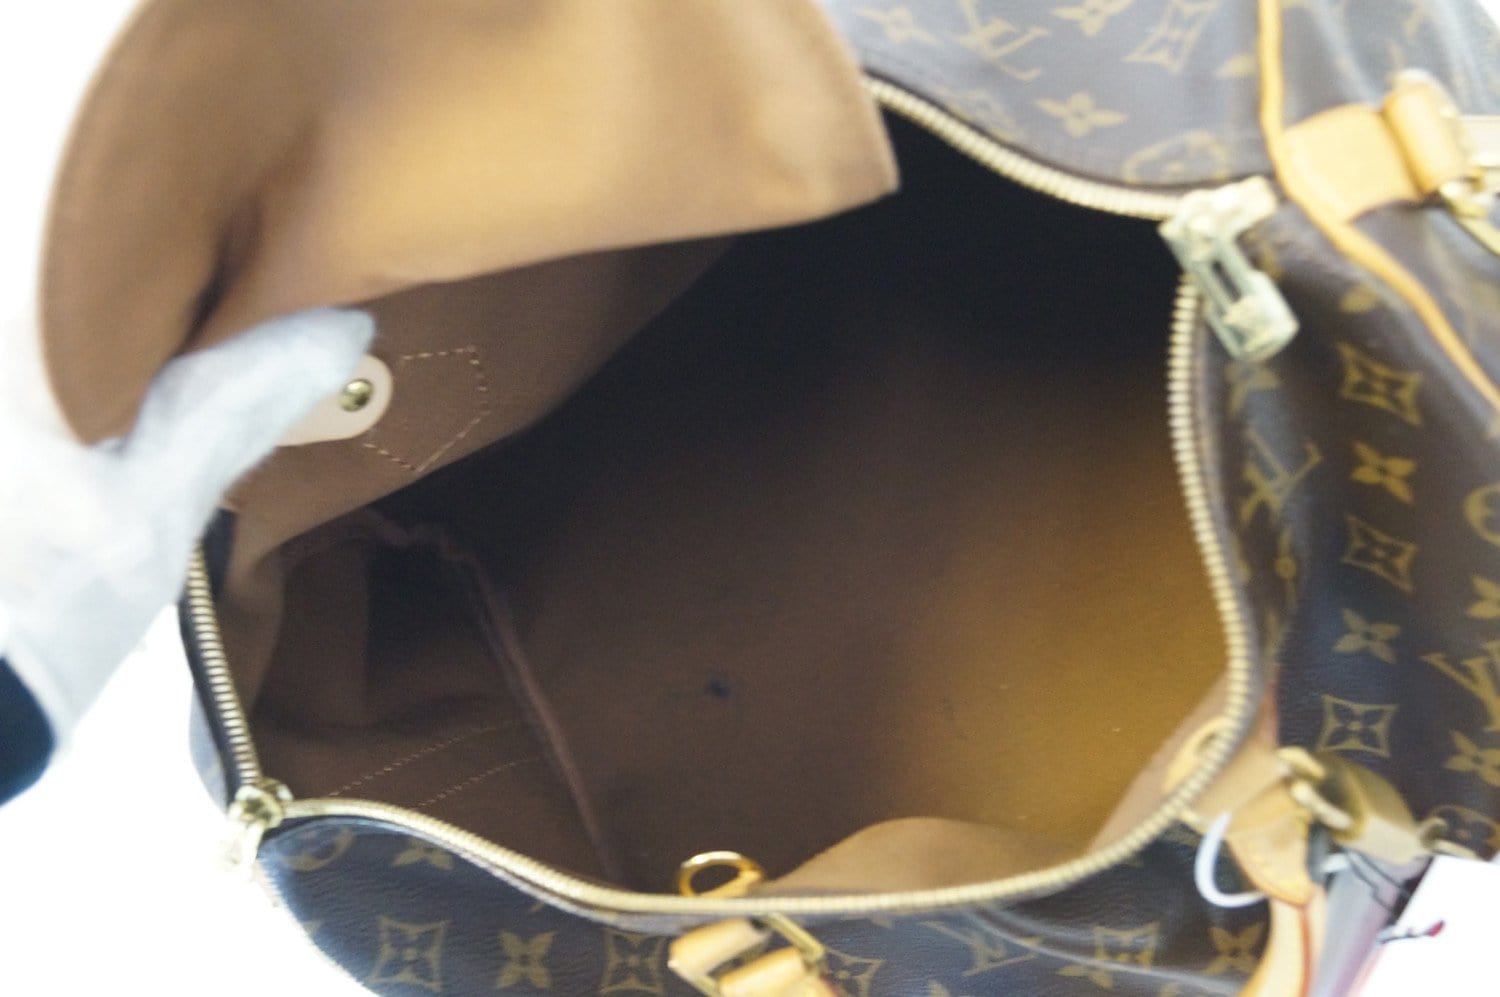 Louis Vuitton 2012 pre-owned Speedy Bandouliere 35 Tote Bag - Farfetch